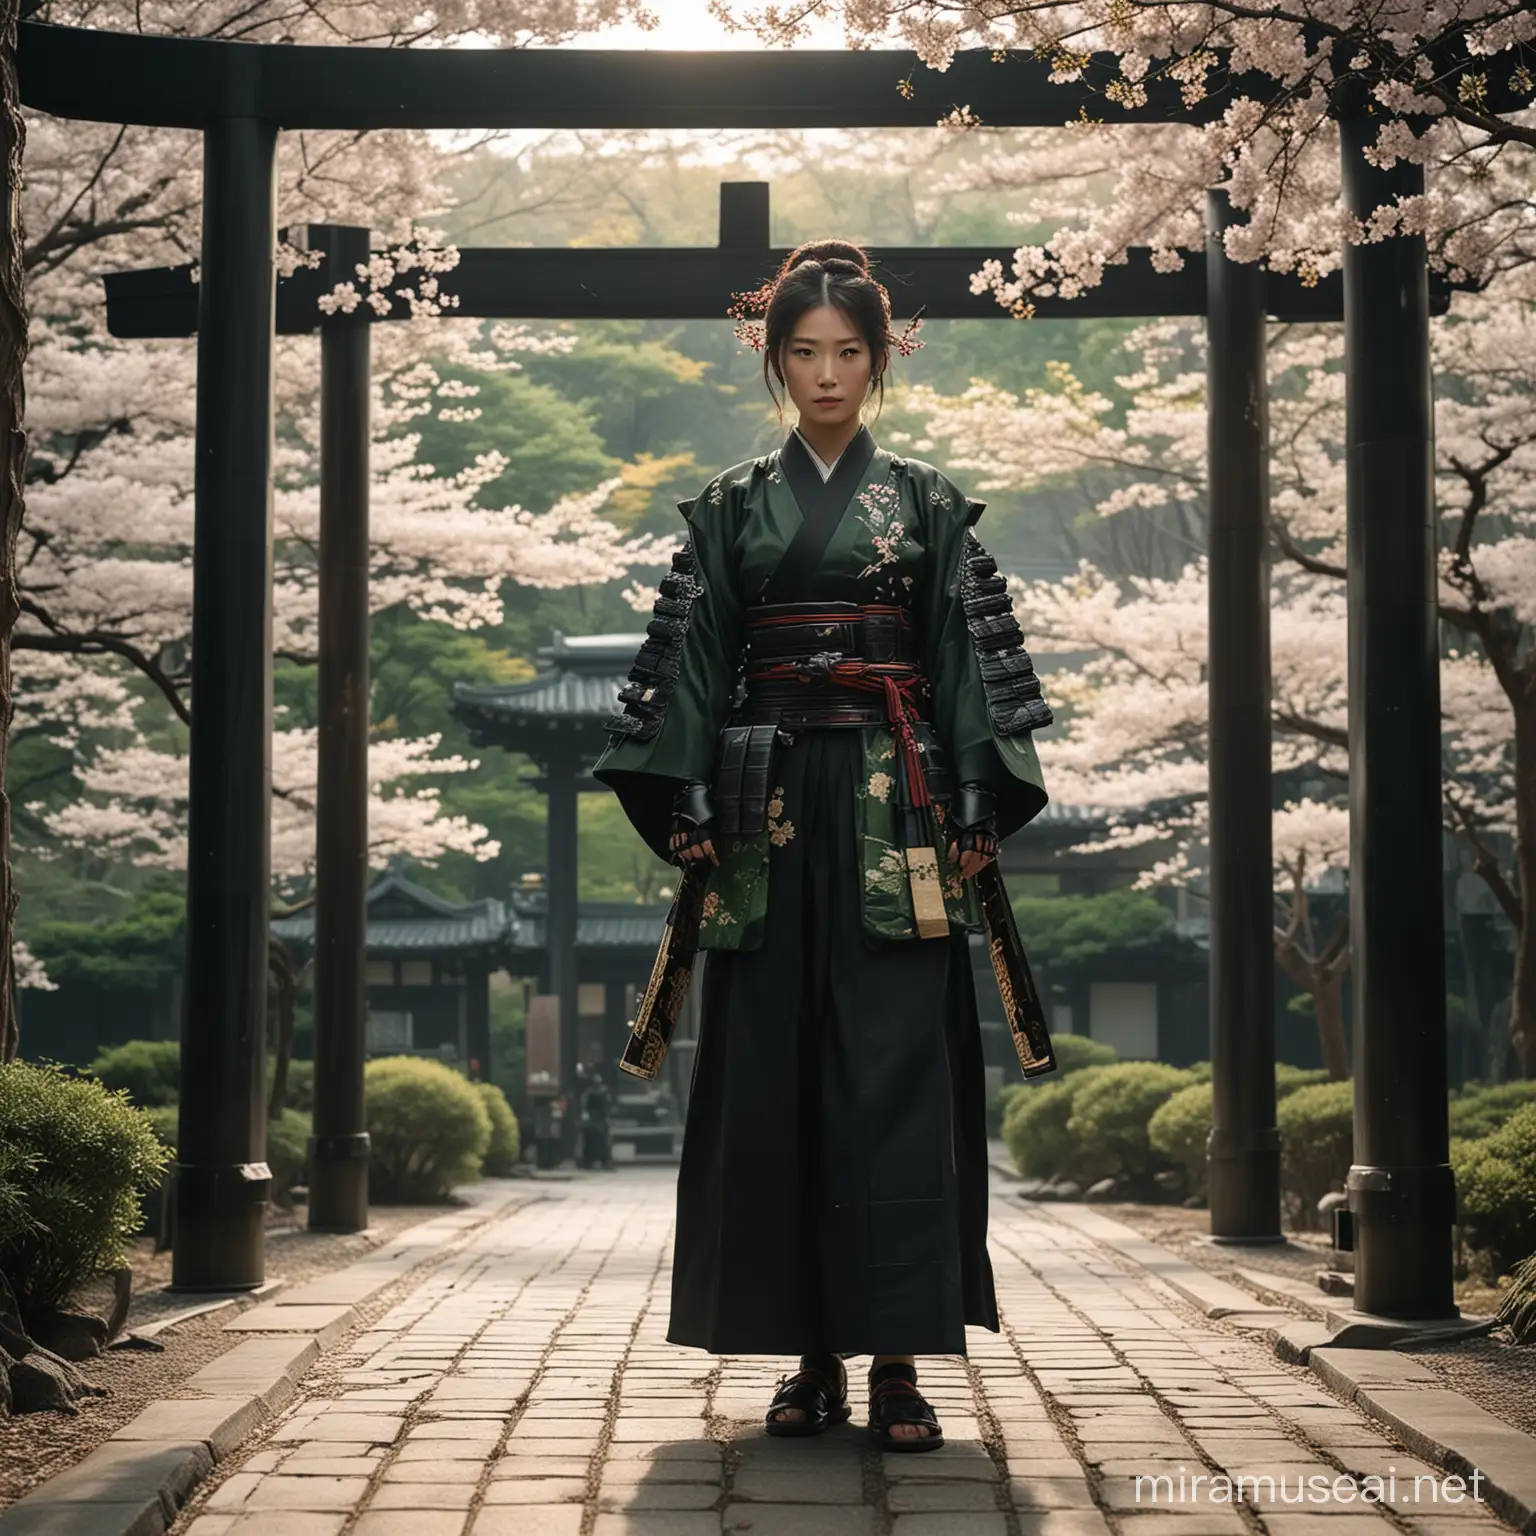 Character: A striking female samurai dressed in shiny black and green ō-yoroi armor, showing off both beauty and power. The armor's detailed design adds depth to her character. Environment: A peaceful Japanese Temple surrounded by blooming cherry blossom trees. The temple's detailed architecture is clearly shown, enhancing its grand scale. Background: The front view of a symmetrical Japanese Temple, providing a fitting backdrop. The sharp lines and patterns add depth to the overall view. Style: A blend of traditional Samurai and modern fashion in a black and green ō-yoroi style. The mix of old and new is clearly showcased. Photography Type: Cinematic Fashion Editorial that captures the essence of the ō-yoroi Samurai Warrior. Every detail is carefully captured to tell a visually appealing story. Theme: A campaign celebrating the ō-yoroi Samurai Warrior, showcasing the blend of tradition and modernity. The theme is meticulously detailed, allowing viewers to immerse themselves in the samurai world. Visual Filters: Enhanced with a Fashion Film Look-Up Table (LUT), adding depth to the visual story. The LUT improves the image's clarity and cinematic quality. Camera Effects: Subtle blur and haze effects are added along with a Cinematic Film Lut, enhancing the depth and adding atmosphere to the scene. Time: Evening time adds a calm and charming ambiance to the scene. The soft lights highlight the scene's details. Resolution: Captured in high resolution to preserve every detail. The high resolution enhances the viewing experience. Key Element: The black and green ō-yoroi technical textile, a highlight of the outfit, displays exquisite craftsmanship. The armor's details are clearly shown. Details: Detailed embellishments on the black and green ō-yoroi armor's textile catch and reflect light, adding depth to the visual story. Every detail, from the smallest to the overall character's silhouette, is carefully shown, creating a visually and emotionally appealing image.